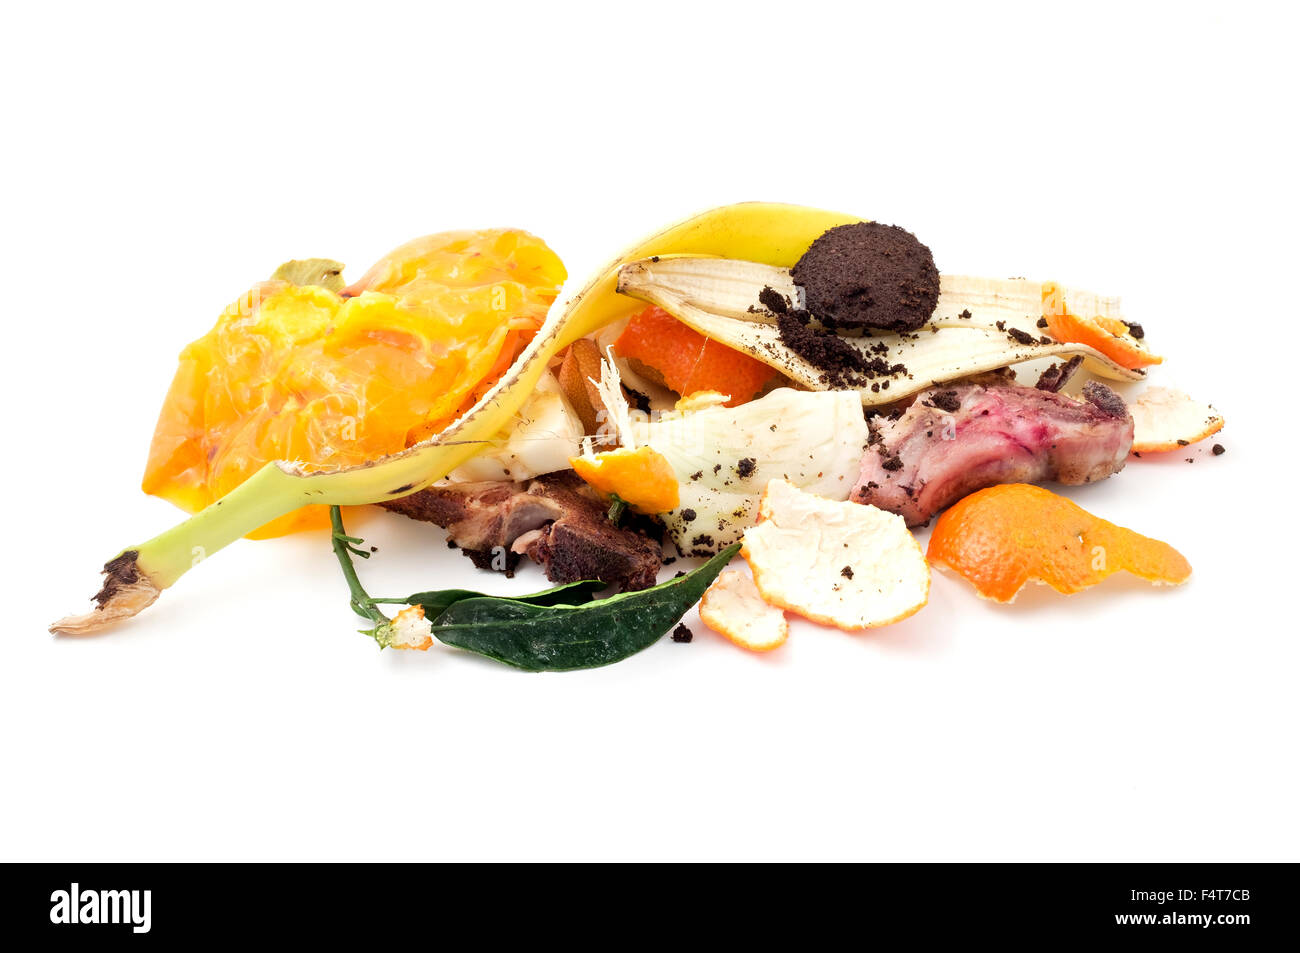 Food waste on a white background Stock Photo